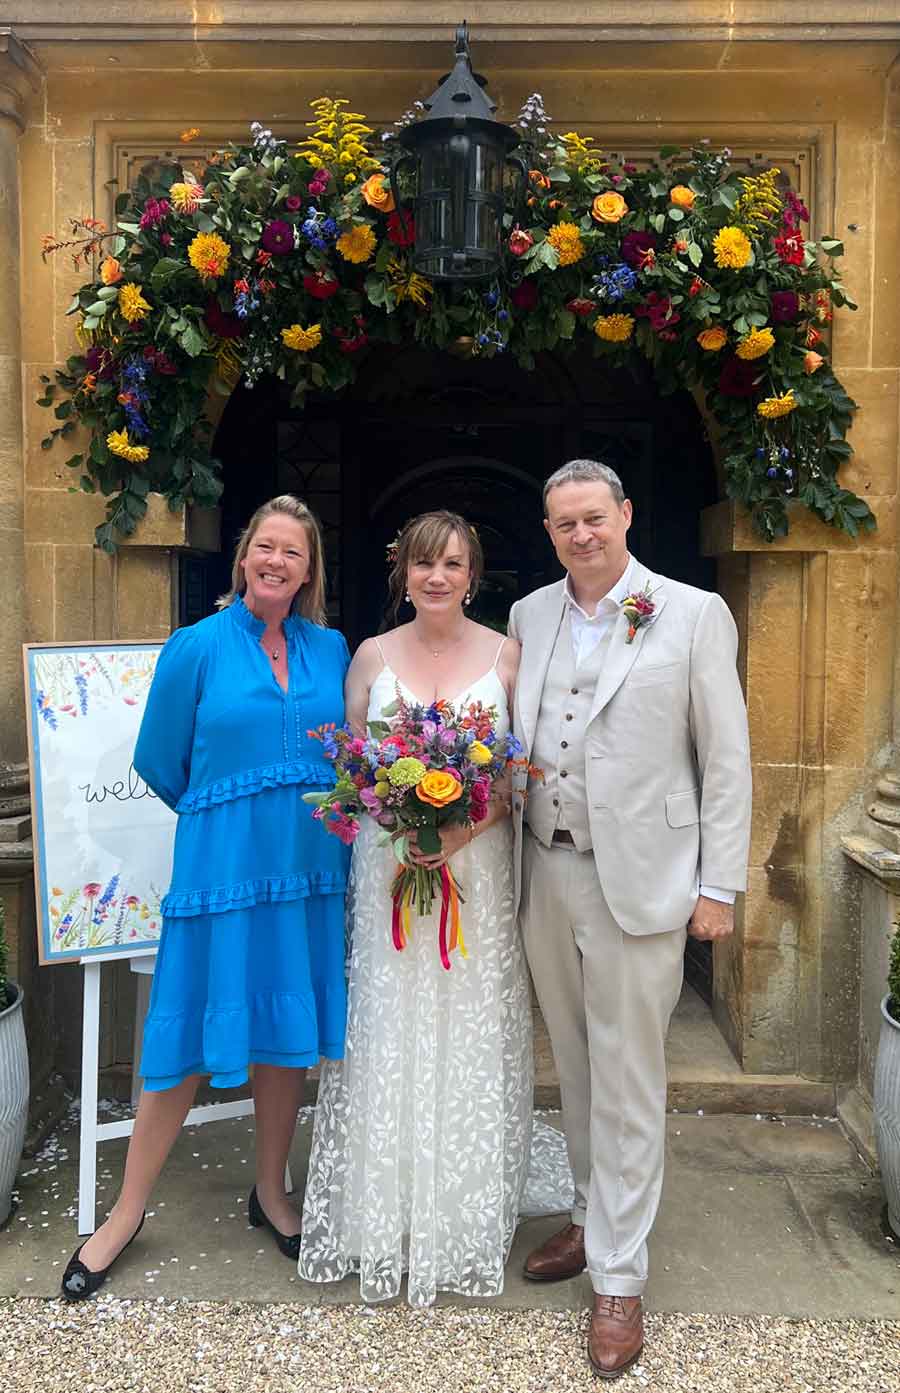 A happy couple after renewing vows with Tara the Celebrant